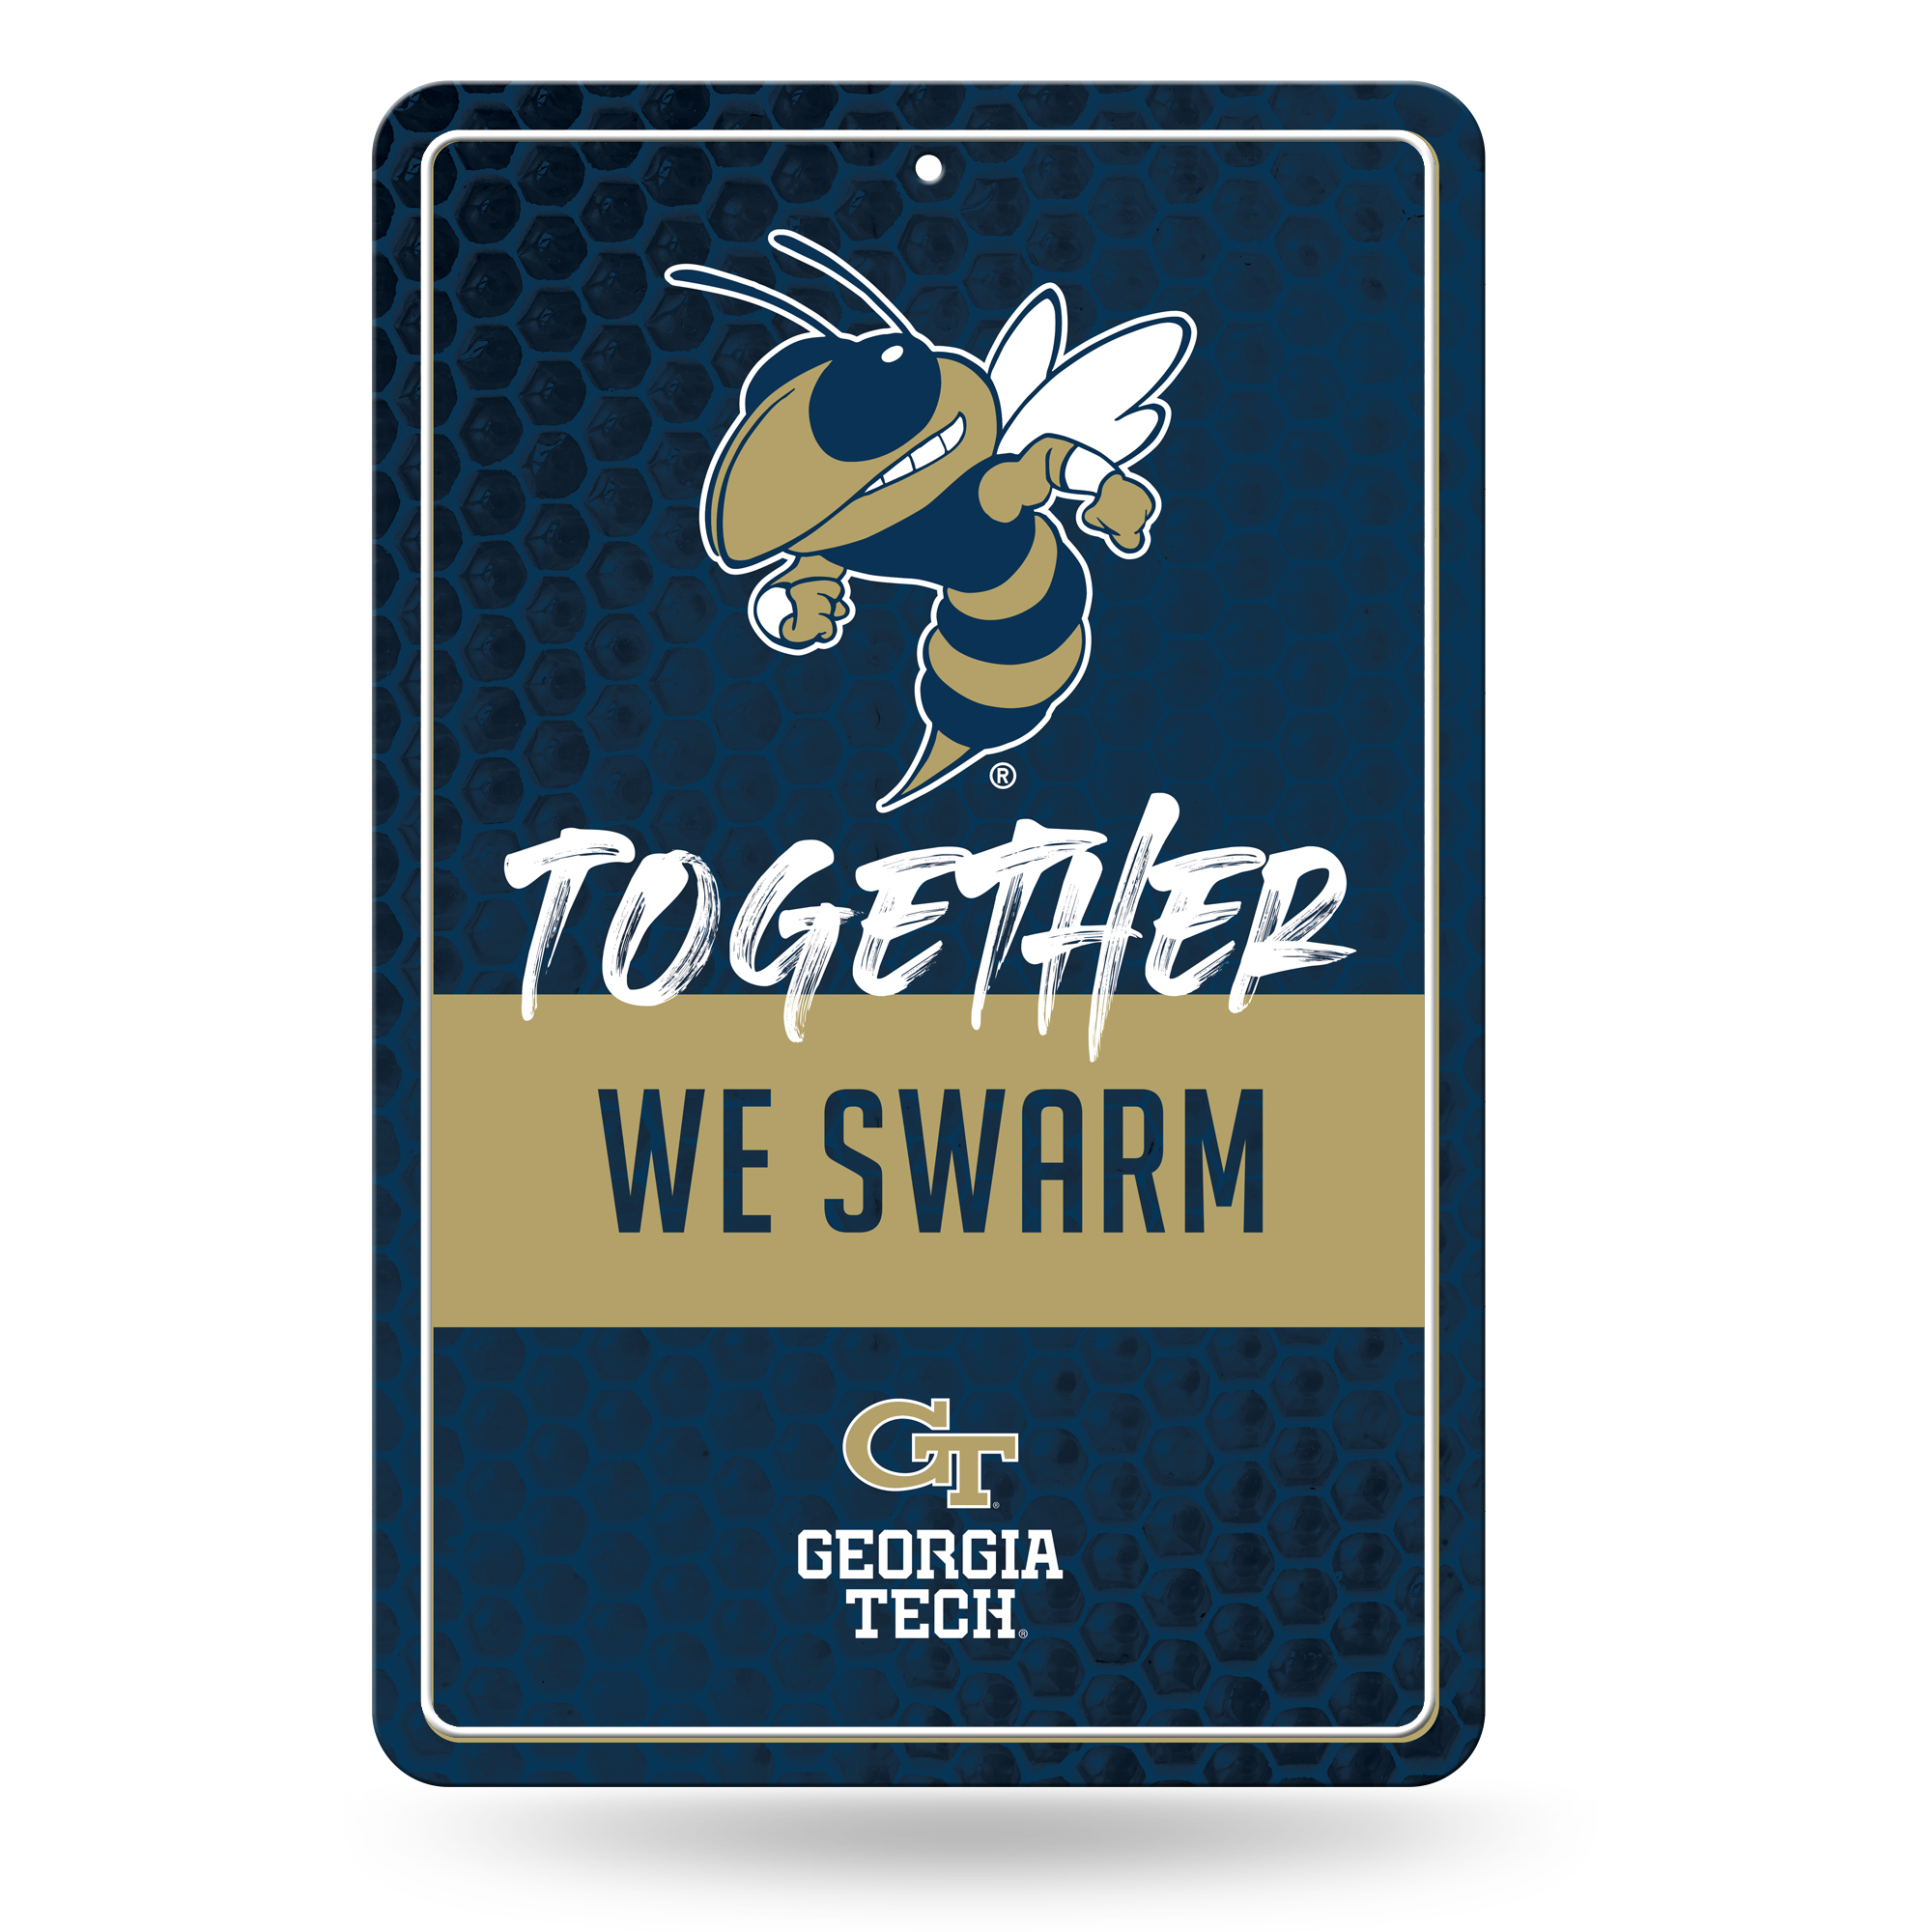 Rico NCAA Rico Industries Georgia Tech Yellow Jackets  Large Metal Sign 11" x 17" Large Metal Home Décor Sign